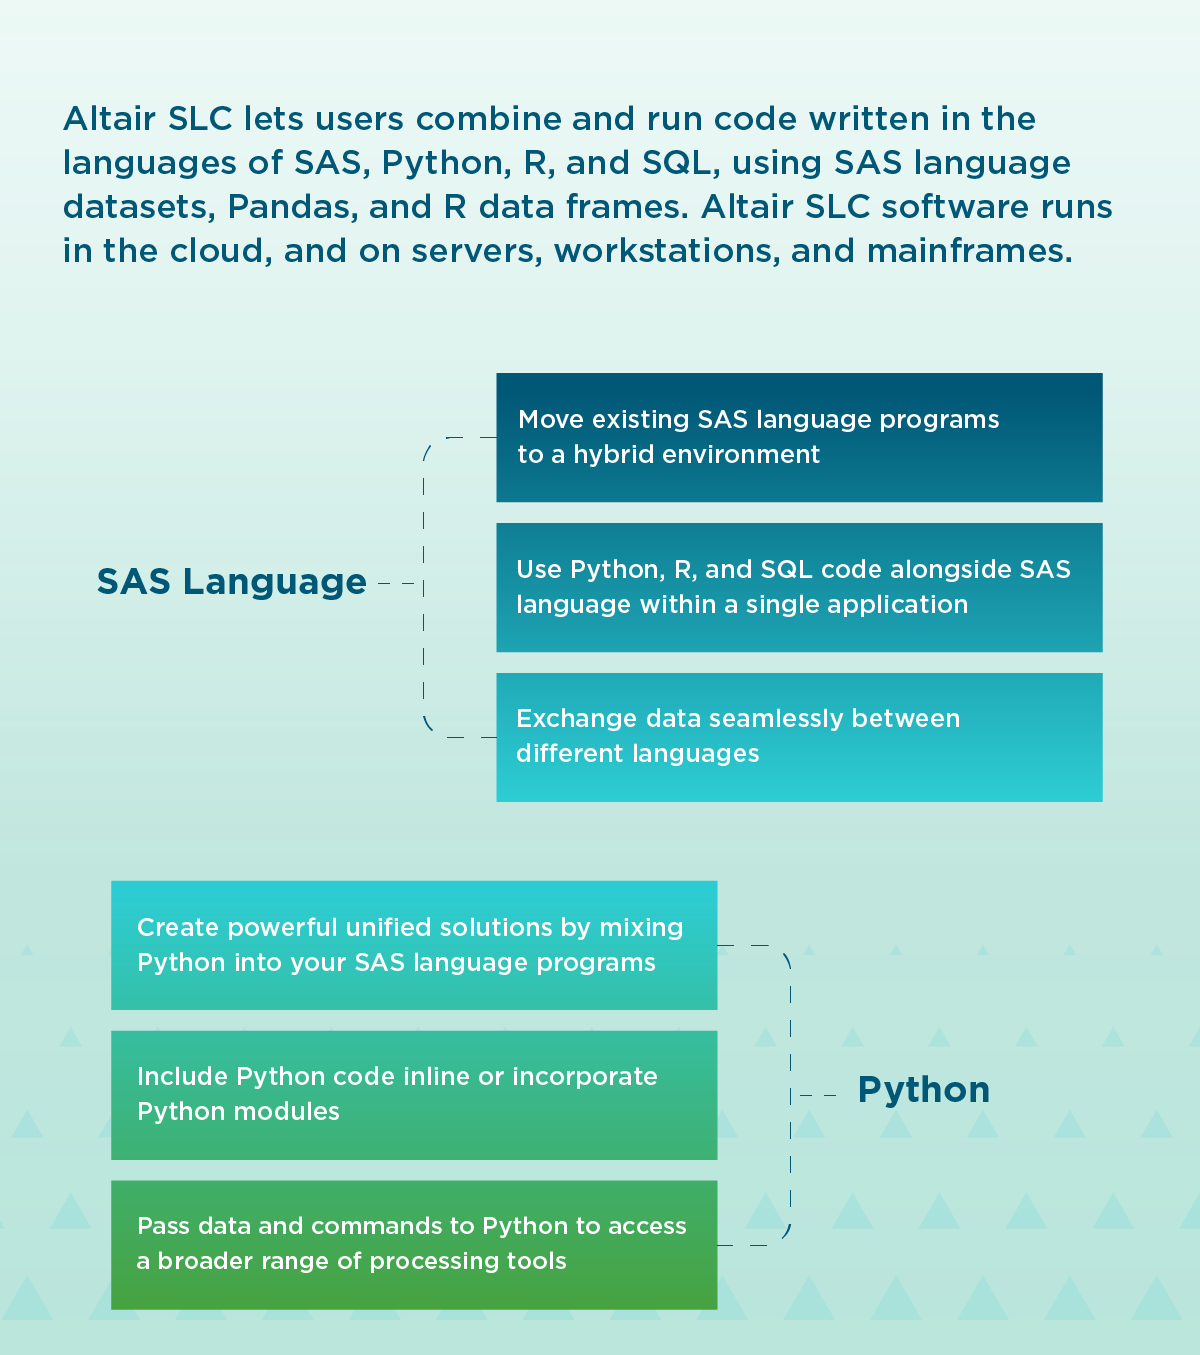 Altair SLC software runs in the cloud and on servers.